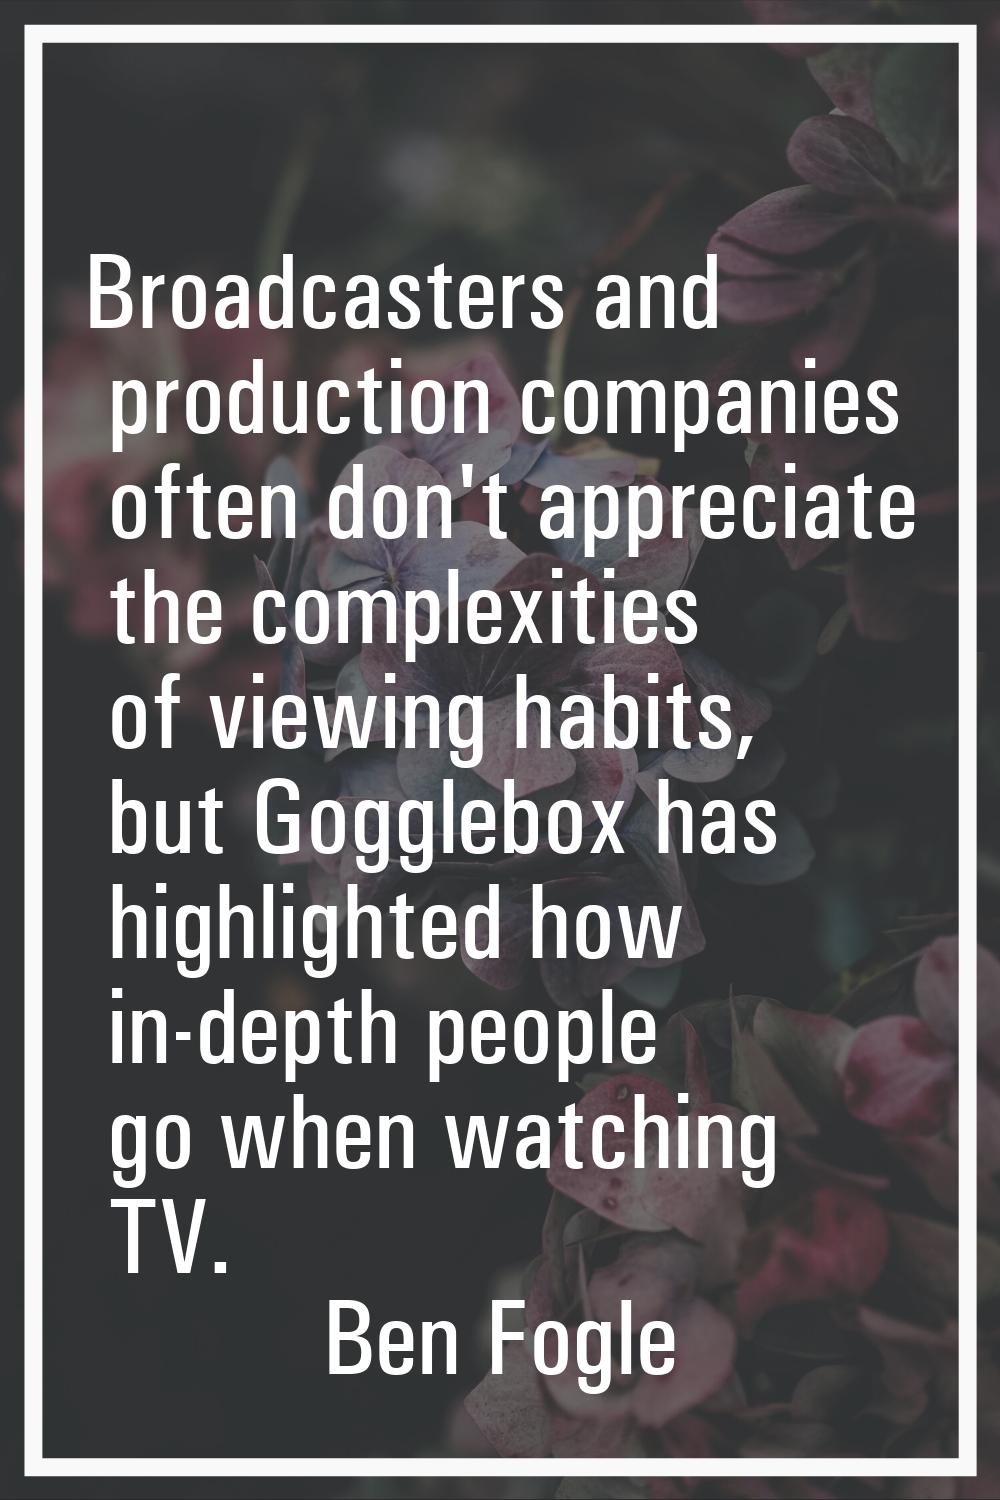 Broadcasters and production companies often don't appreciate the complexities of viewing habits, bu